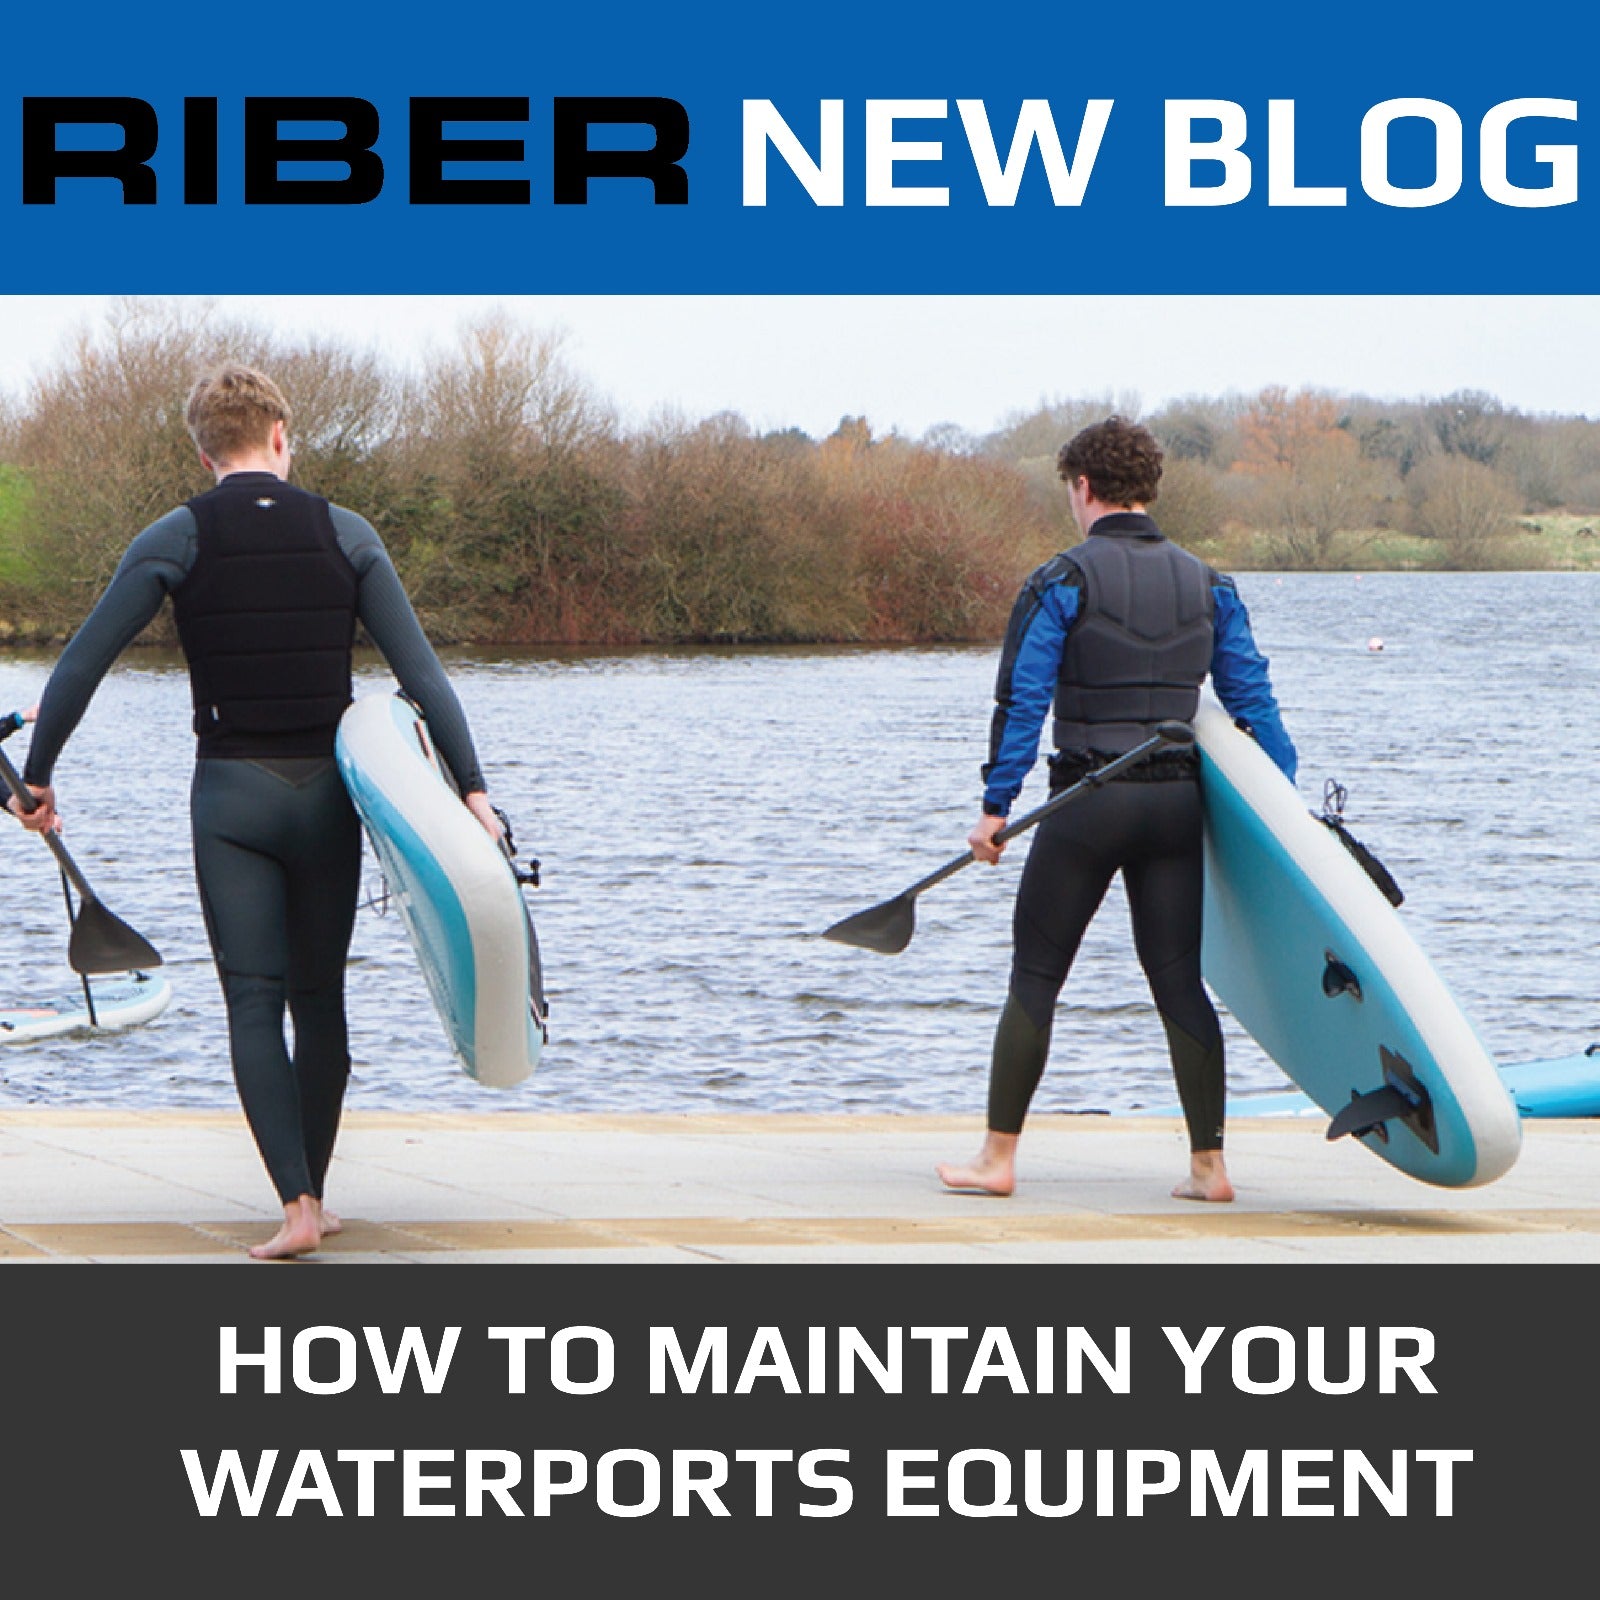 The Ultimate Guide to Properly Caring for Water Sports Equipment